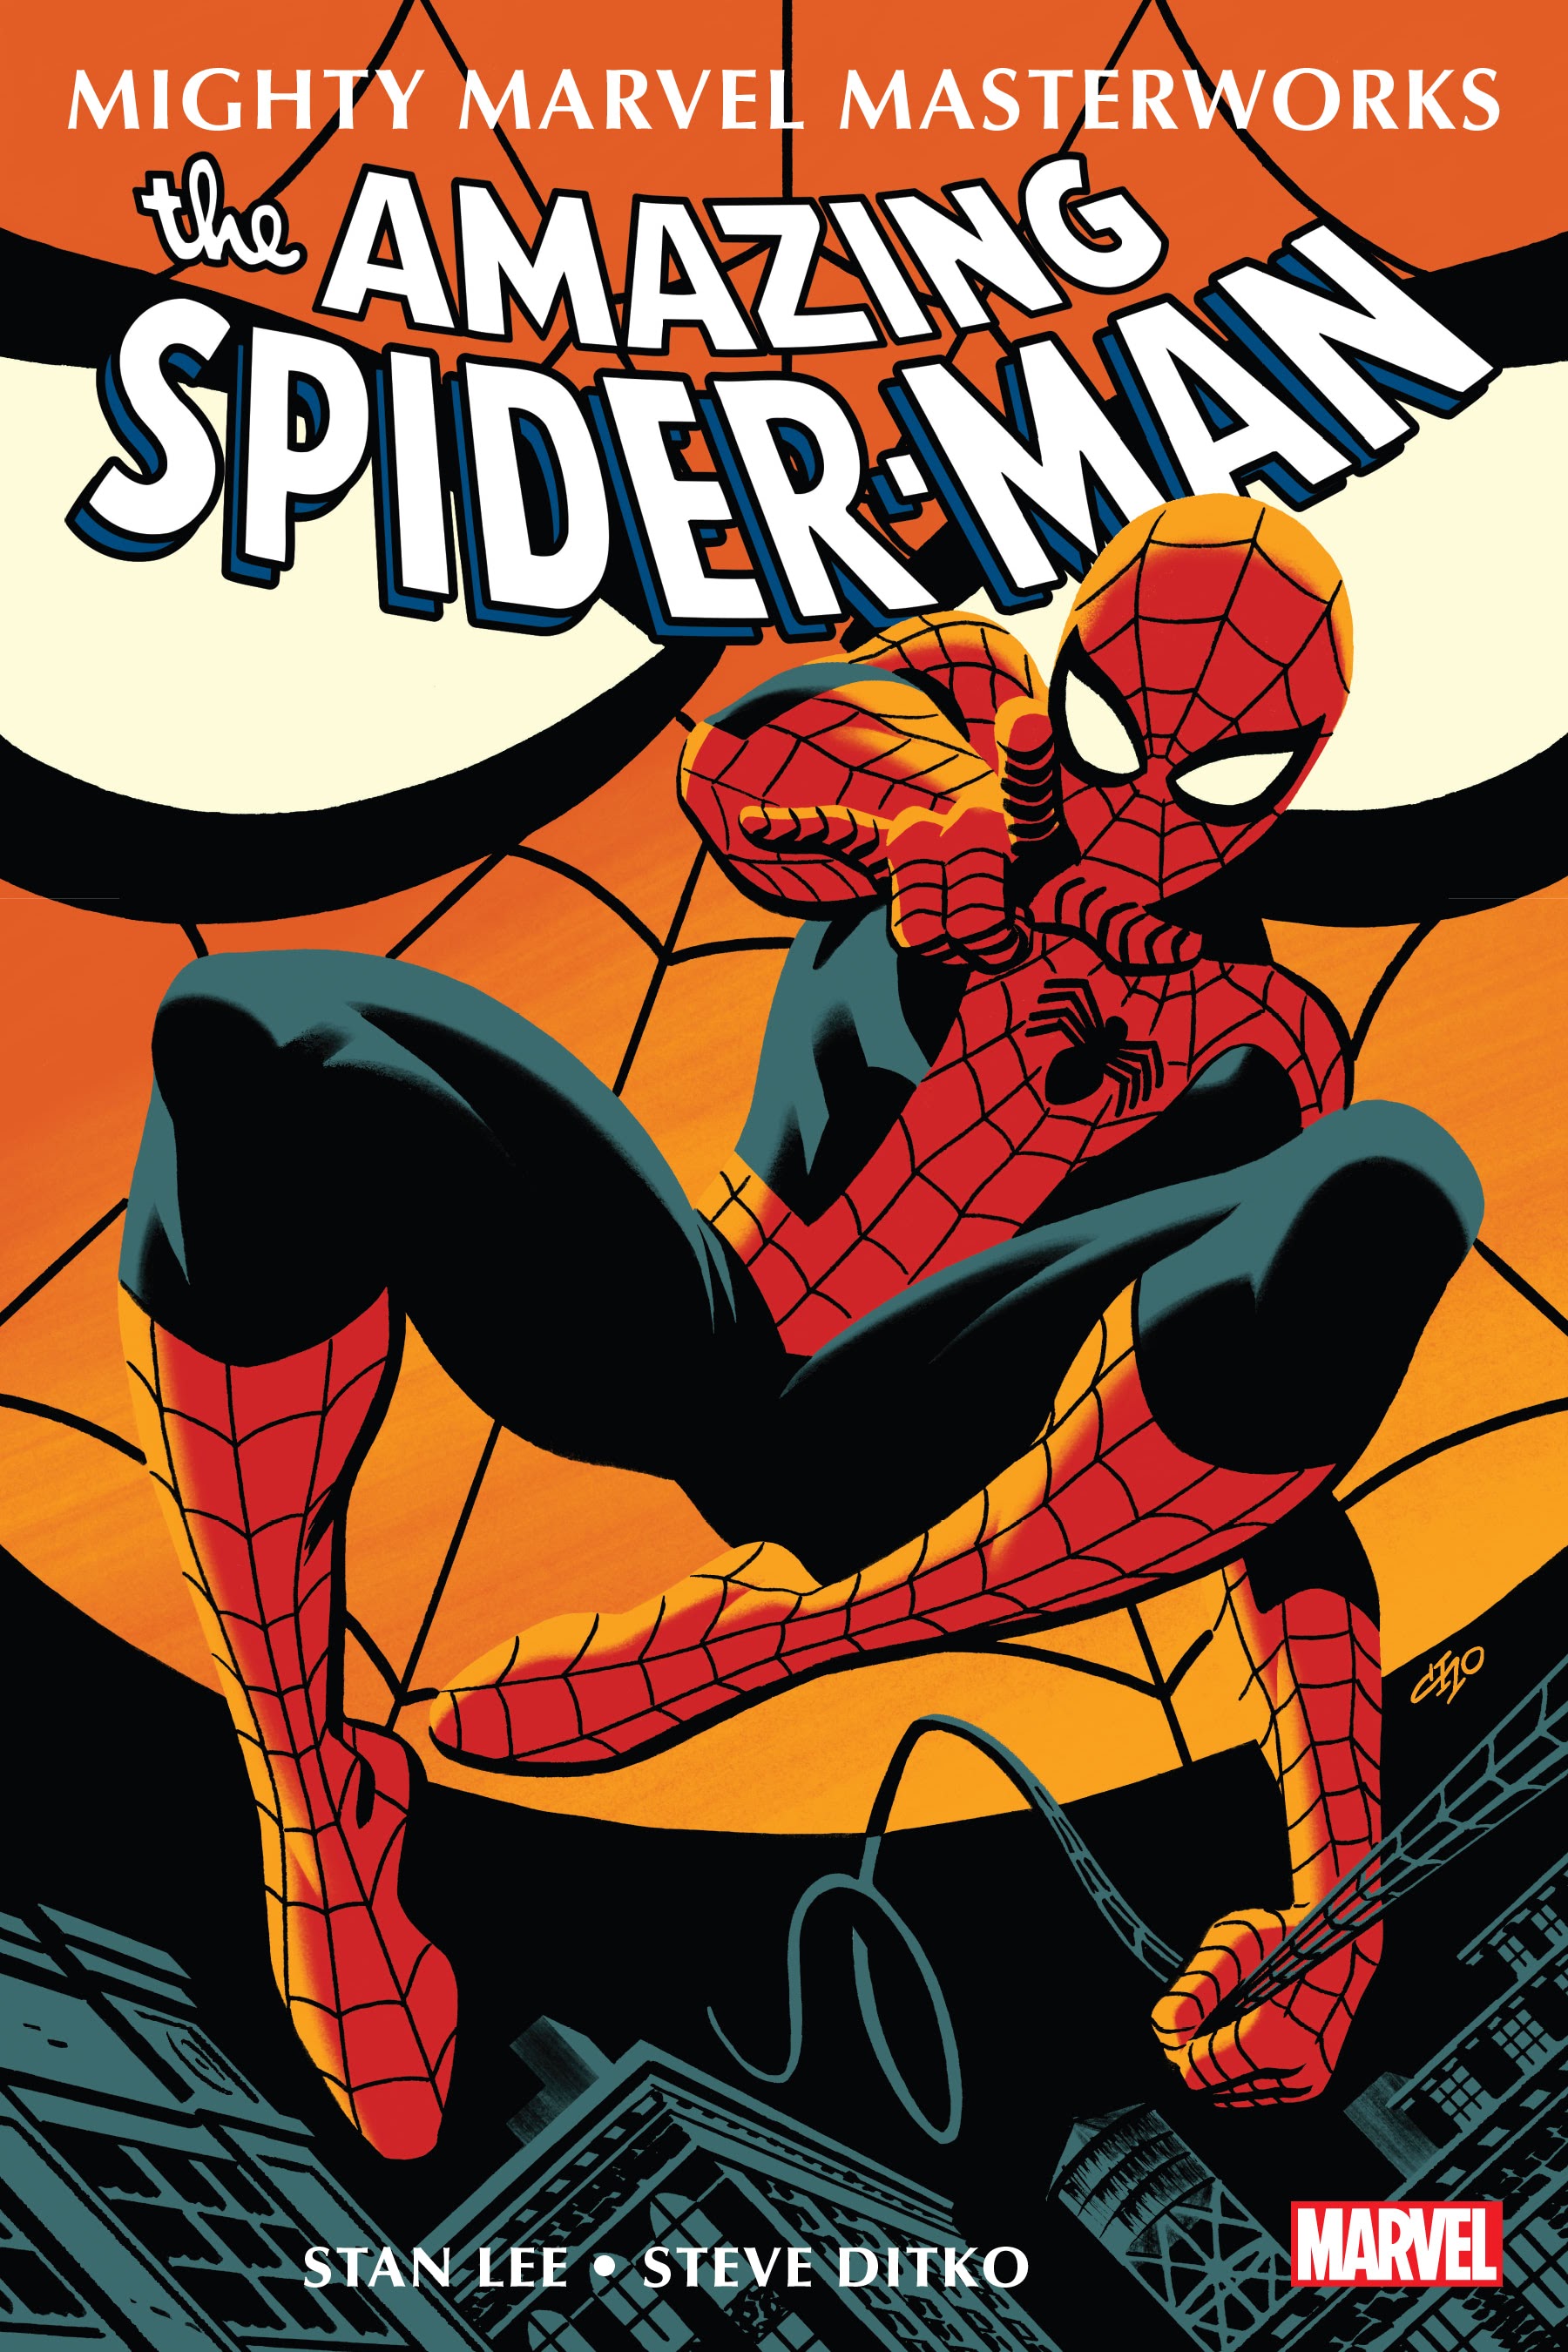 Read online Mighty Marvel Masterworks: The Amazing Spider-Man comic -  Issue # TPB 1 (Part 1) - 1